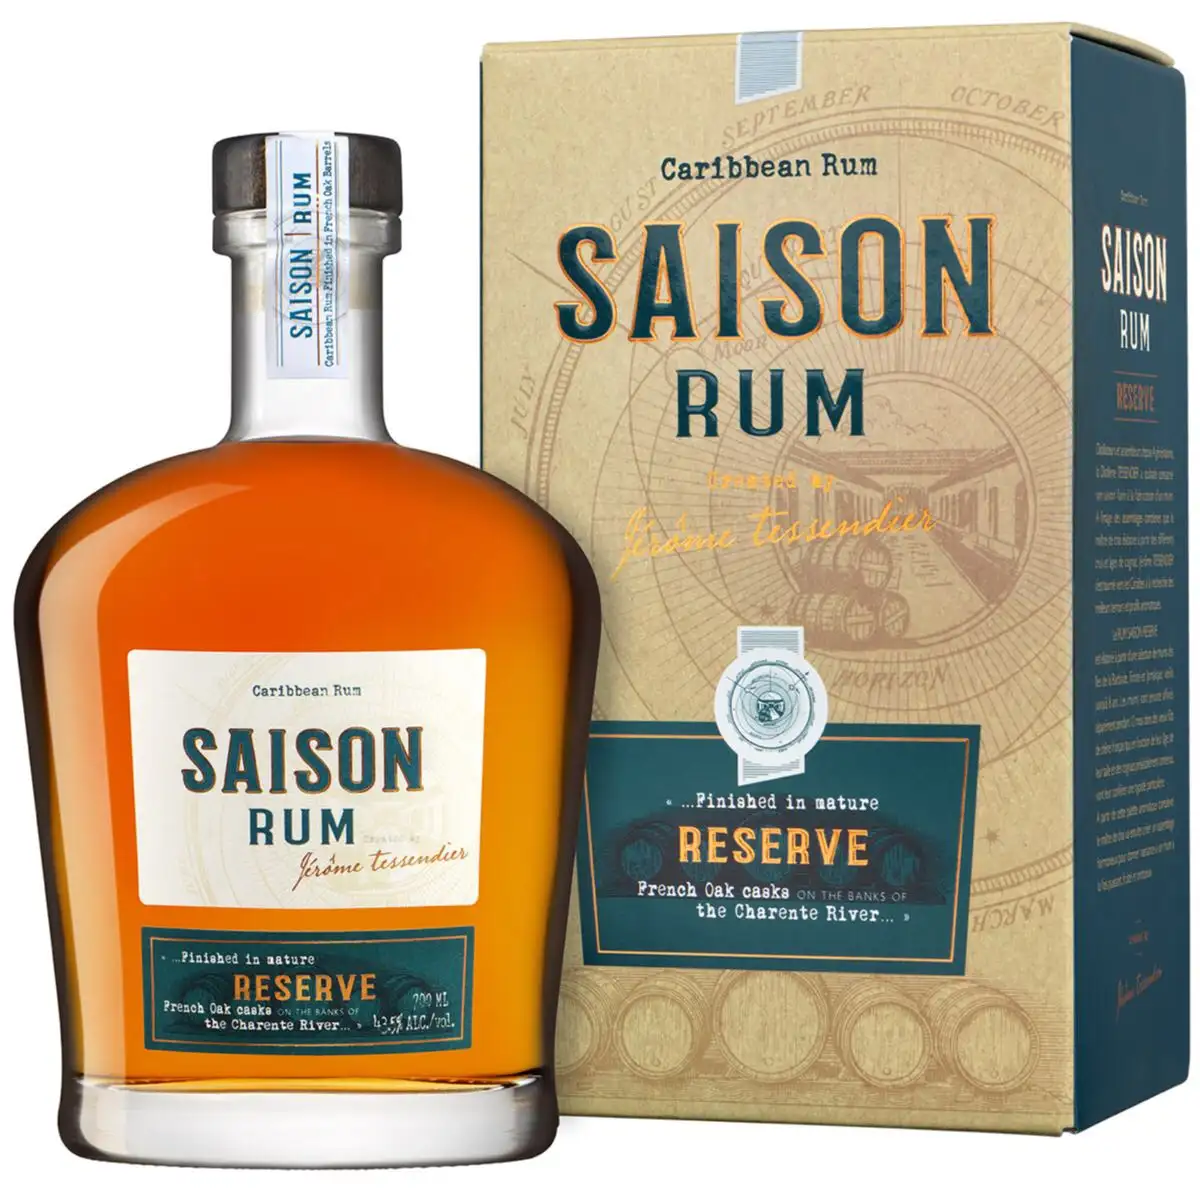 Image of the front of the bottle of the rum Reserve